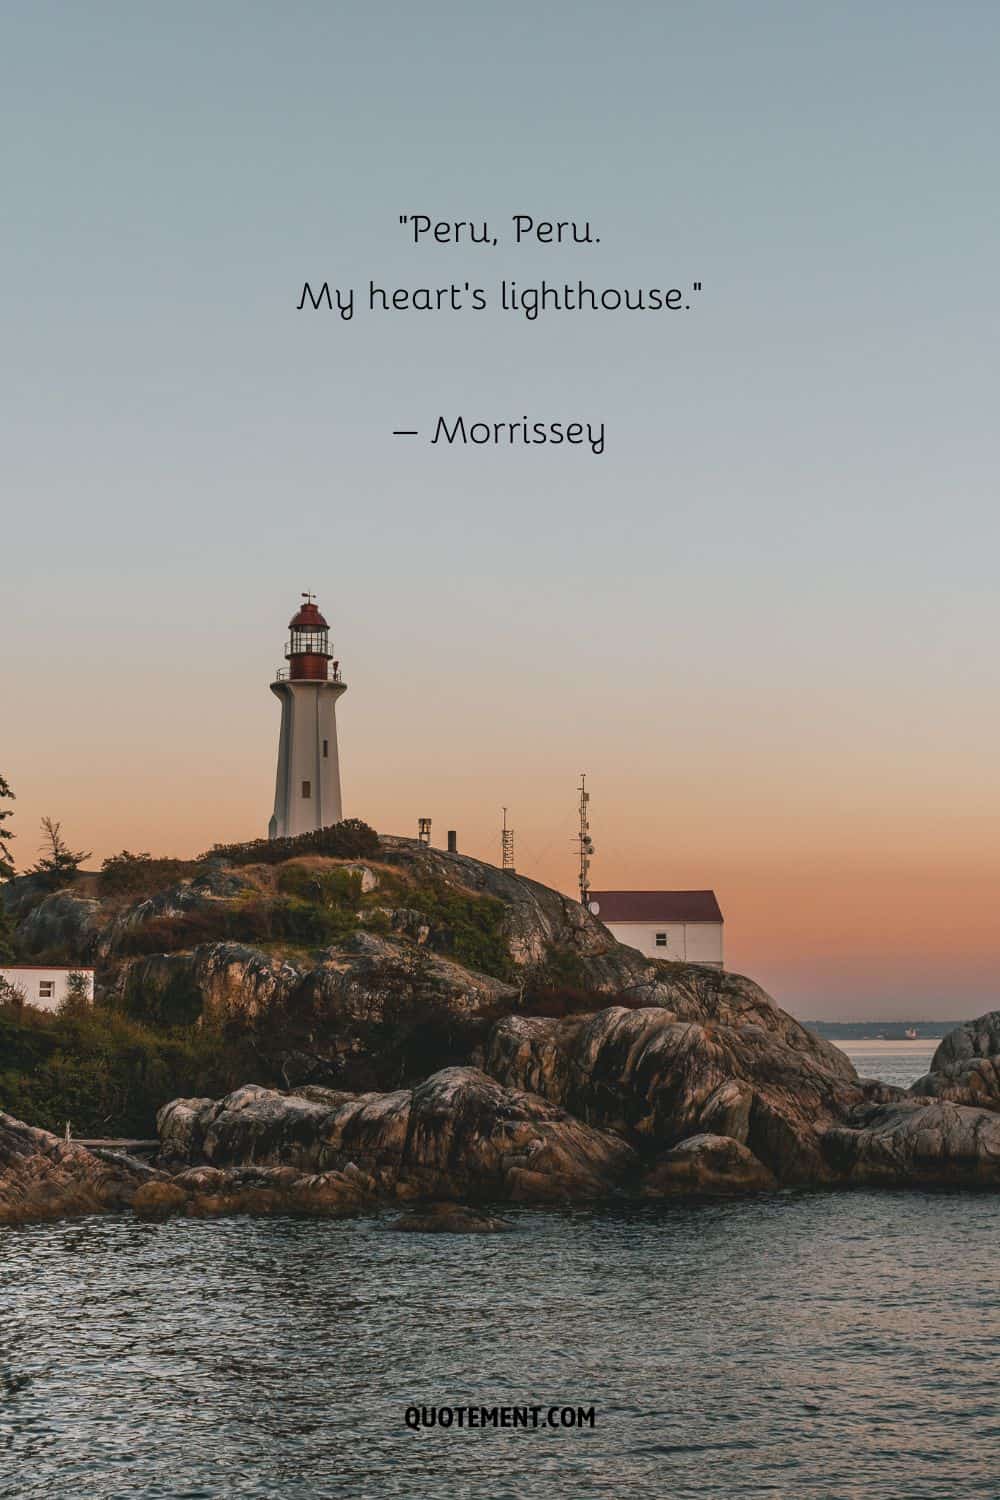 Inspiring quote by Morrissey and a lighthouse in the background